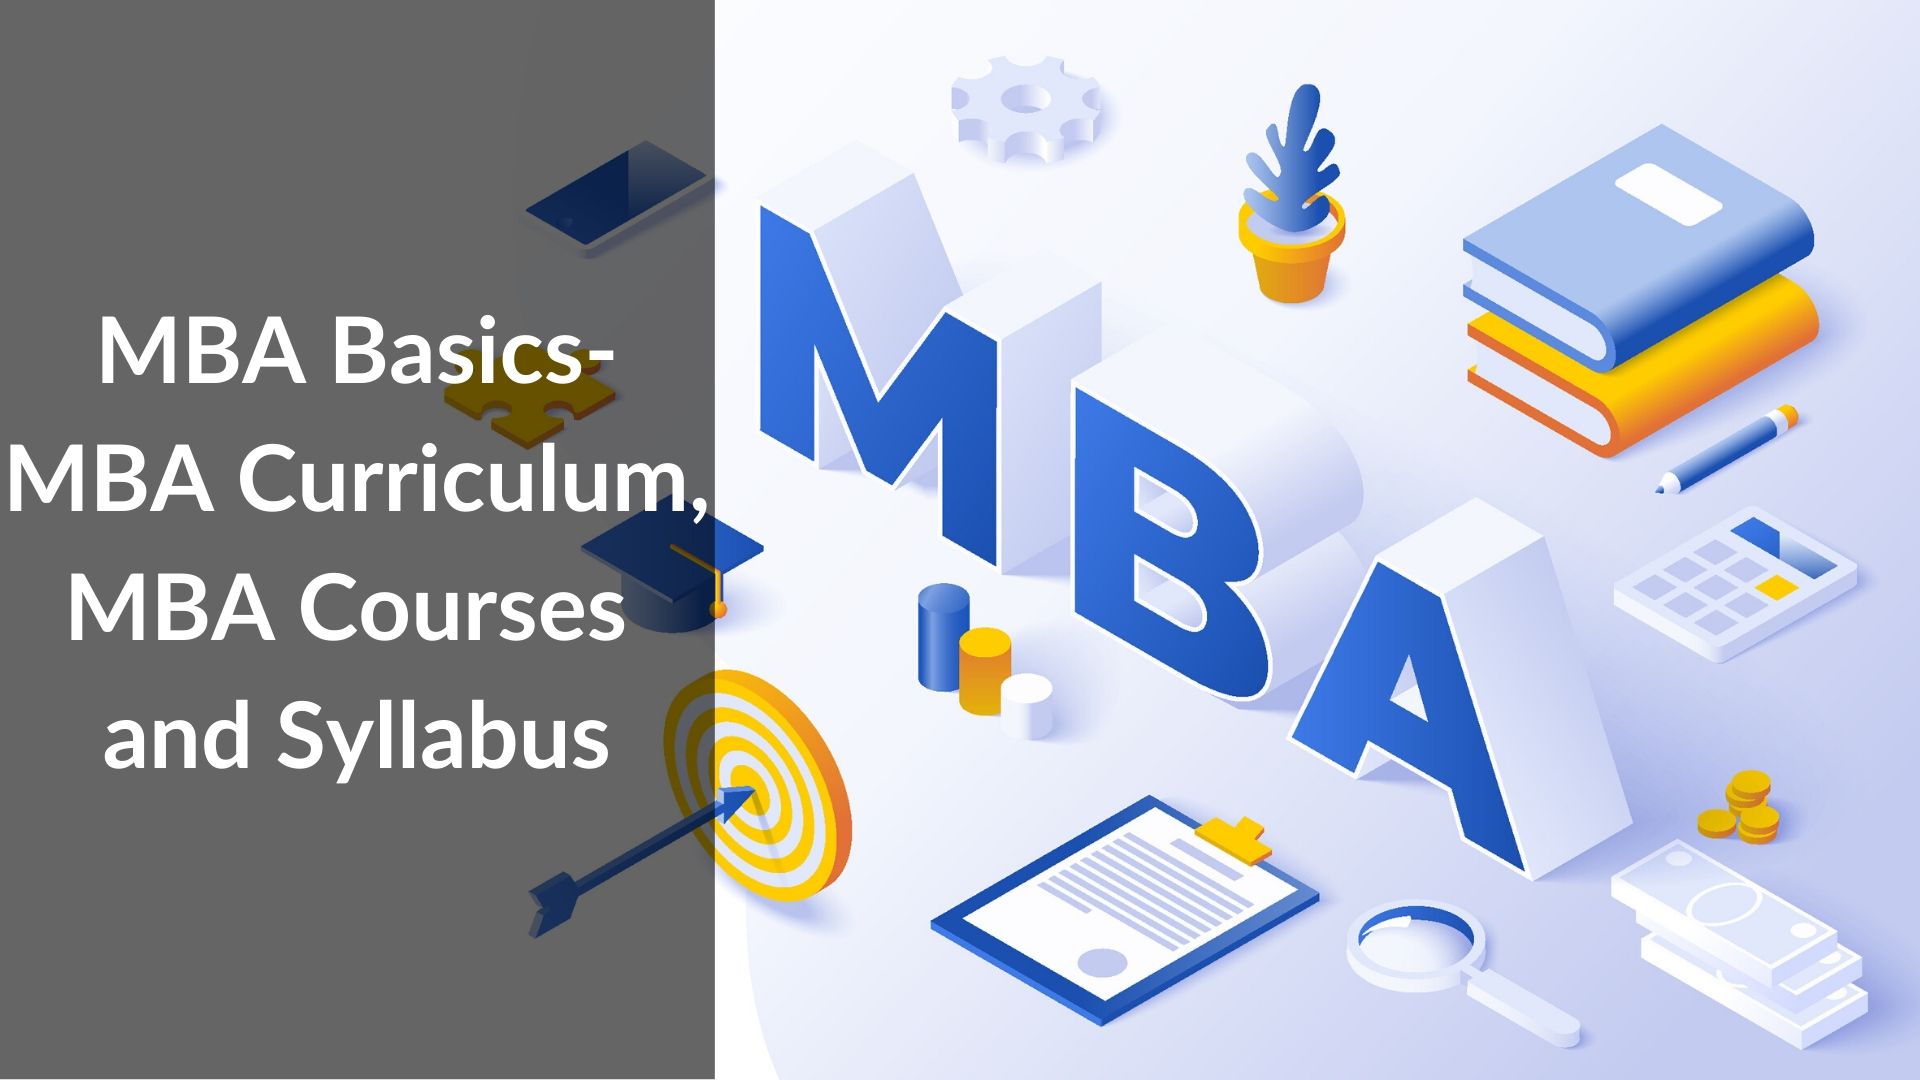 MBA Courses, Syllabus and Curriculum